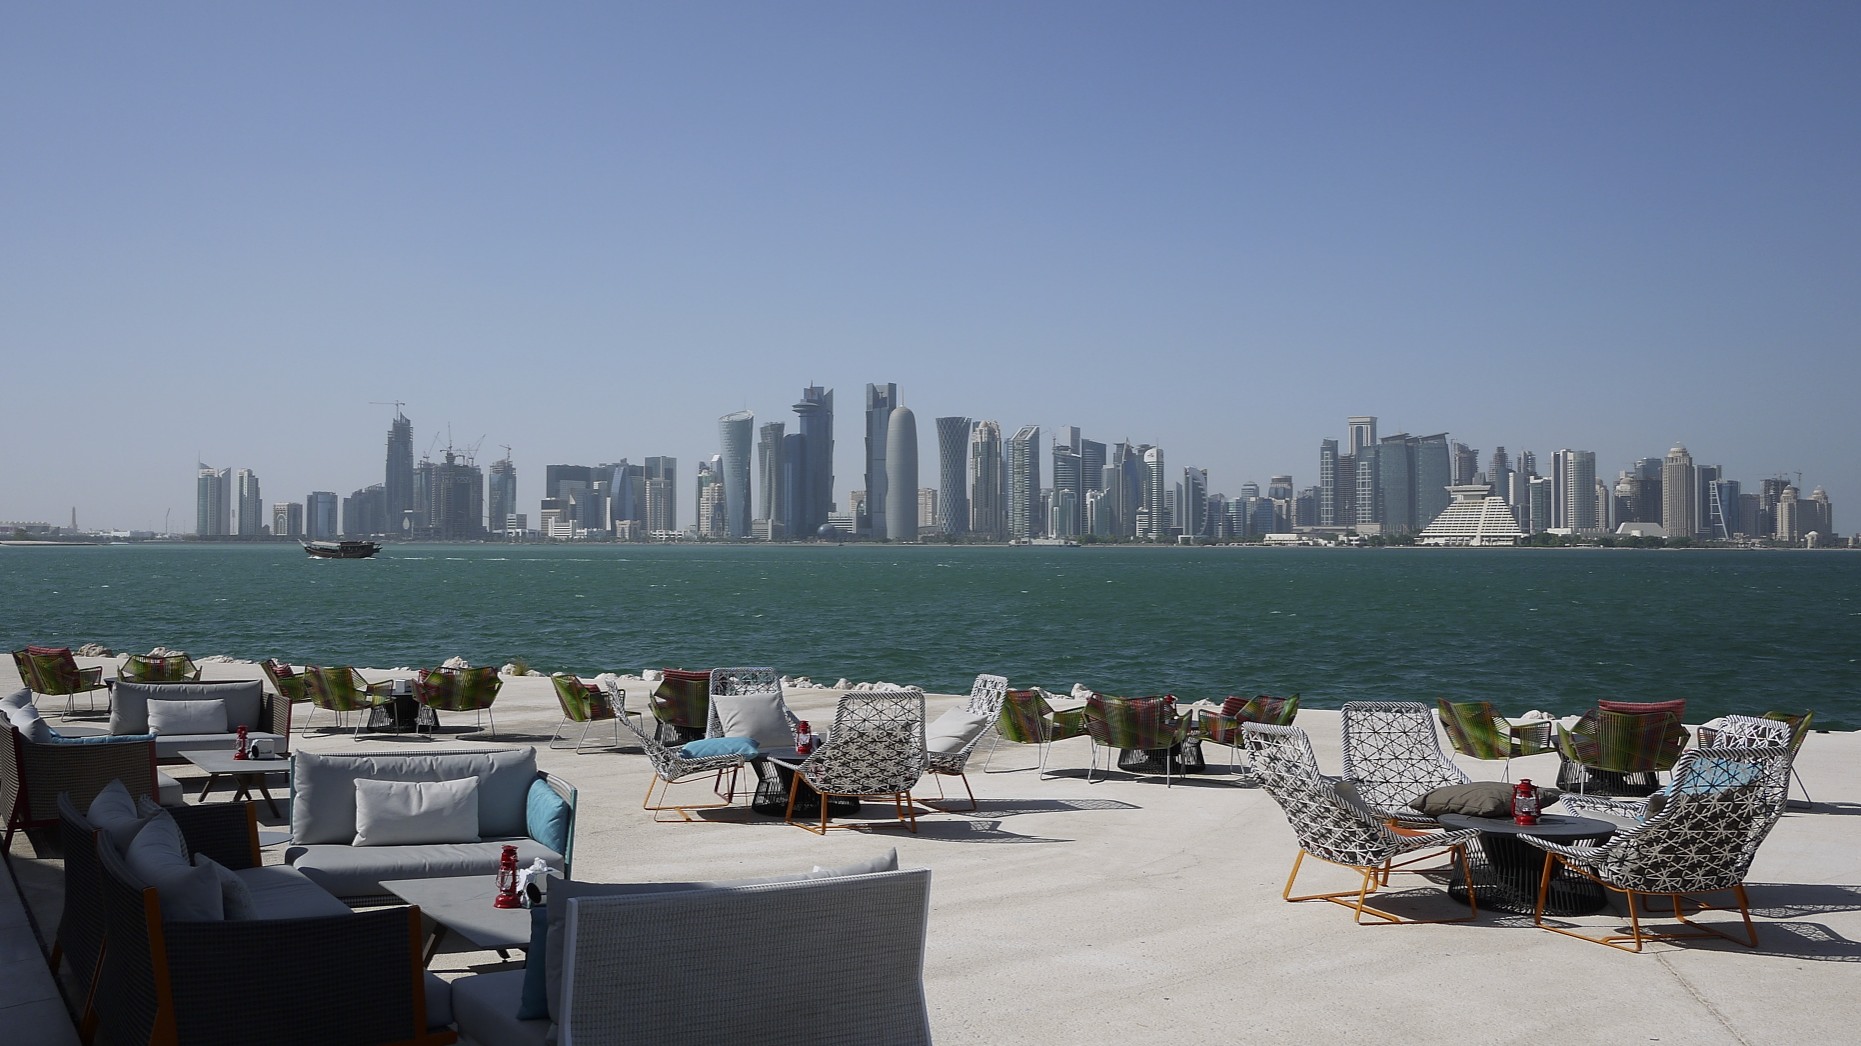 A view across West Bay of development on the New District of Doha – with the permission of Brian Wendleman on Flickr